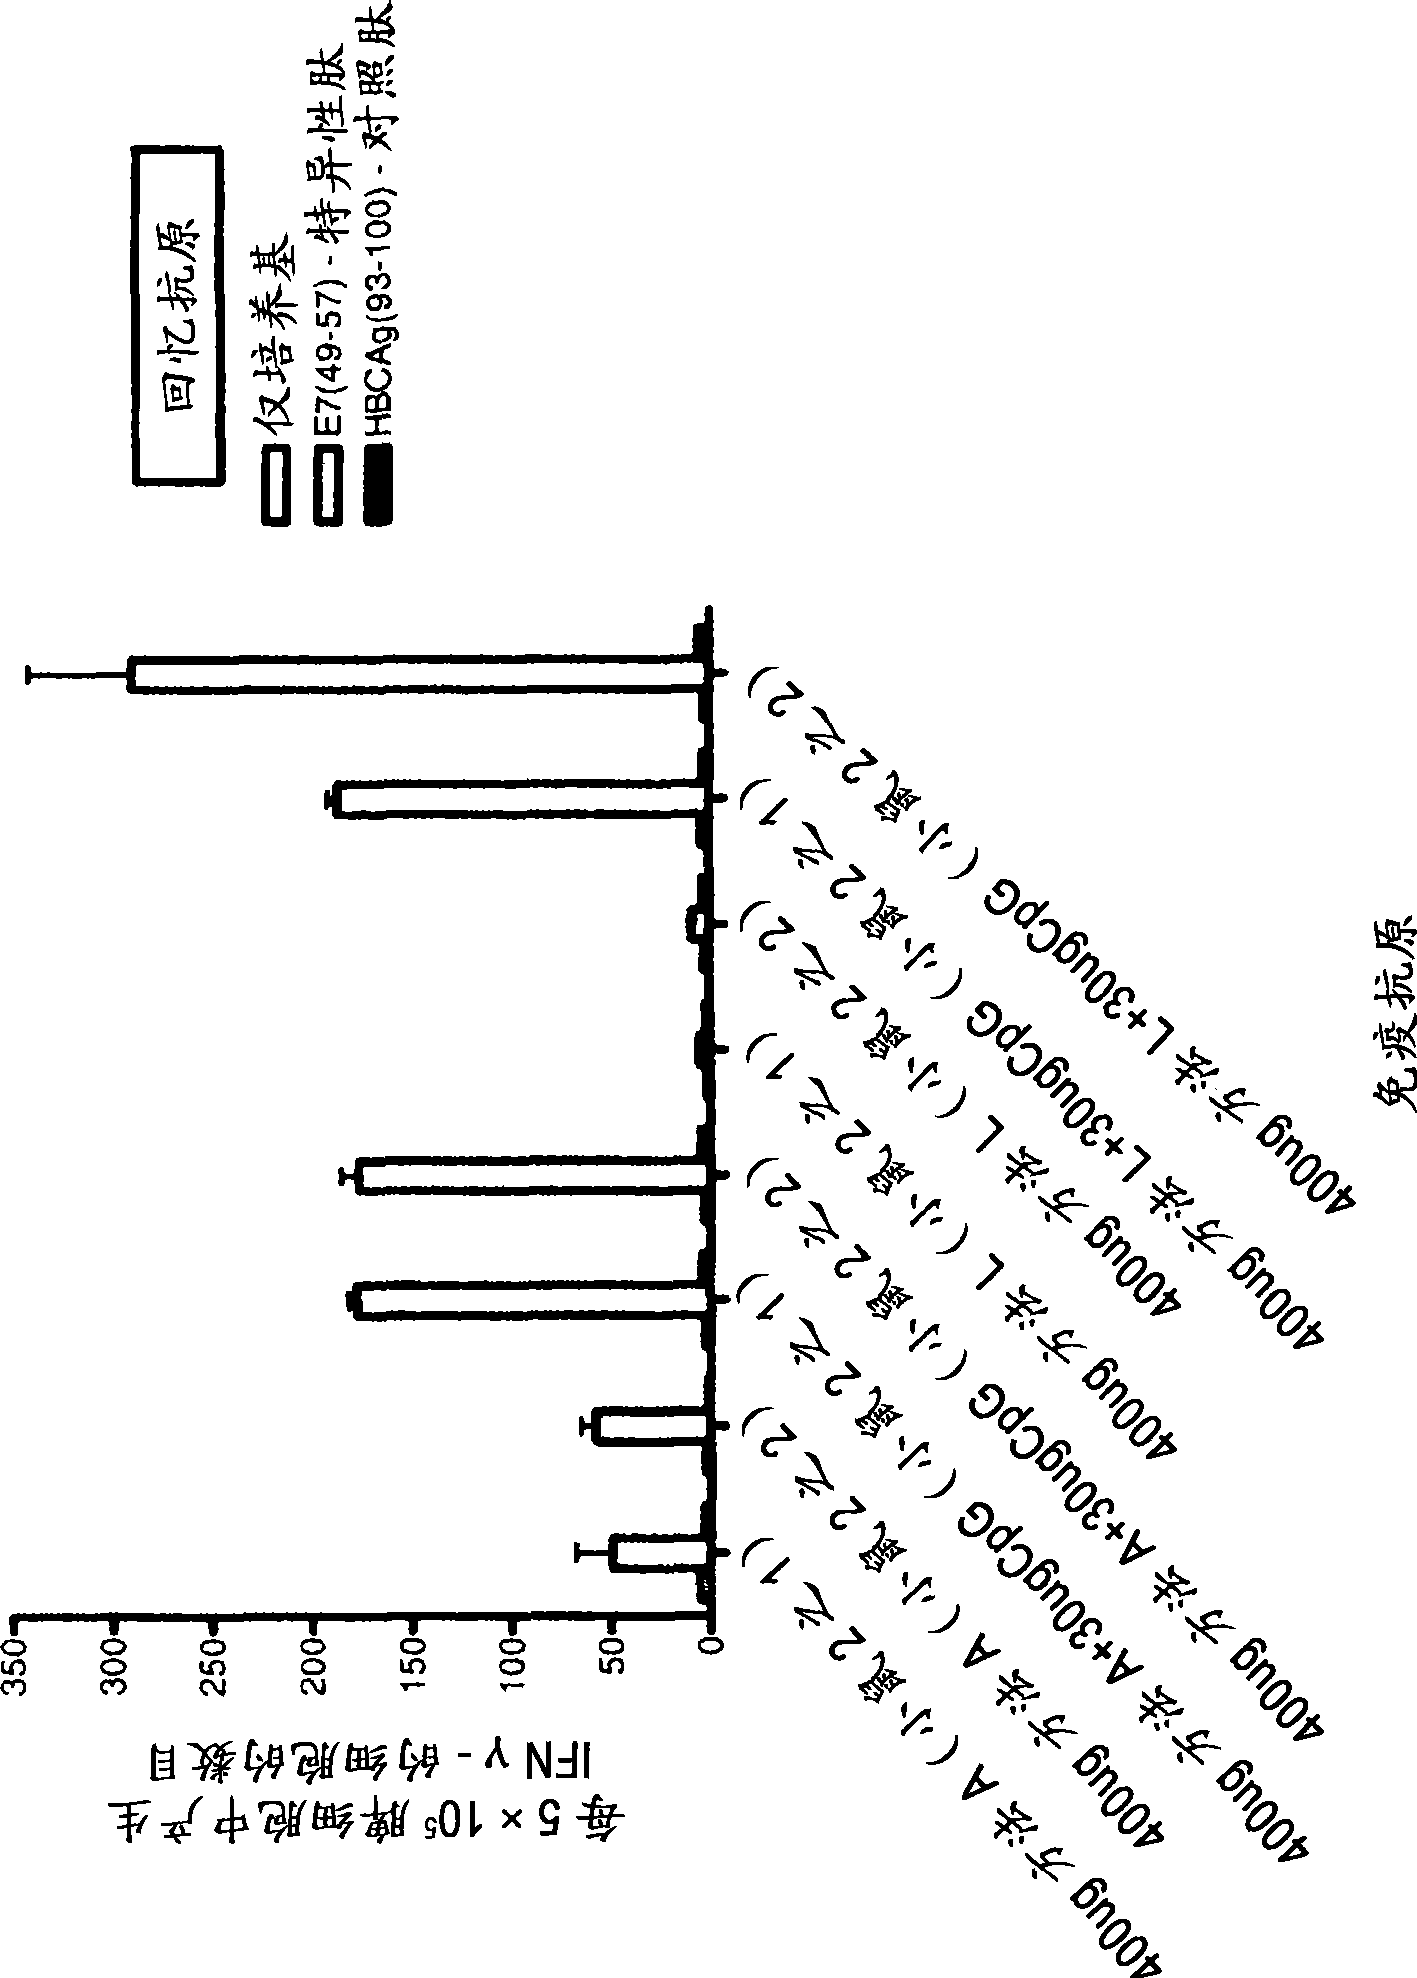 Bioactive purified hspe7 compositions